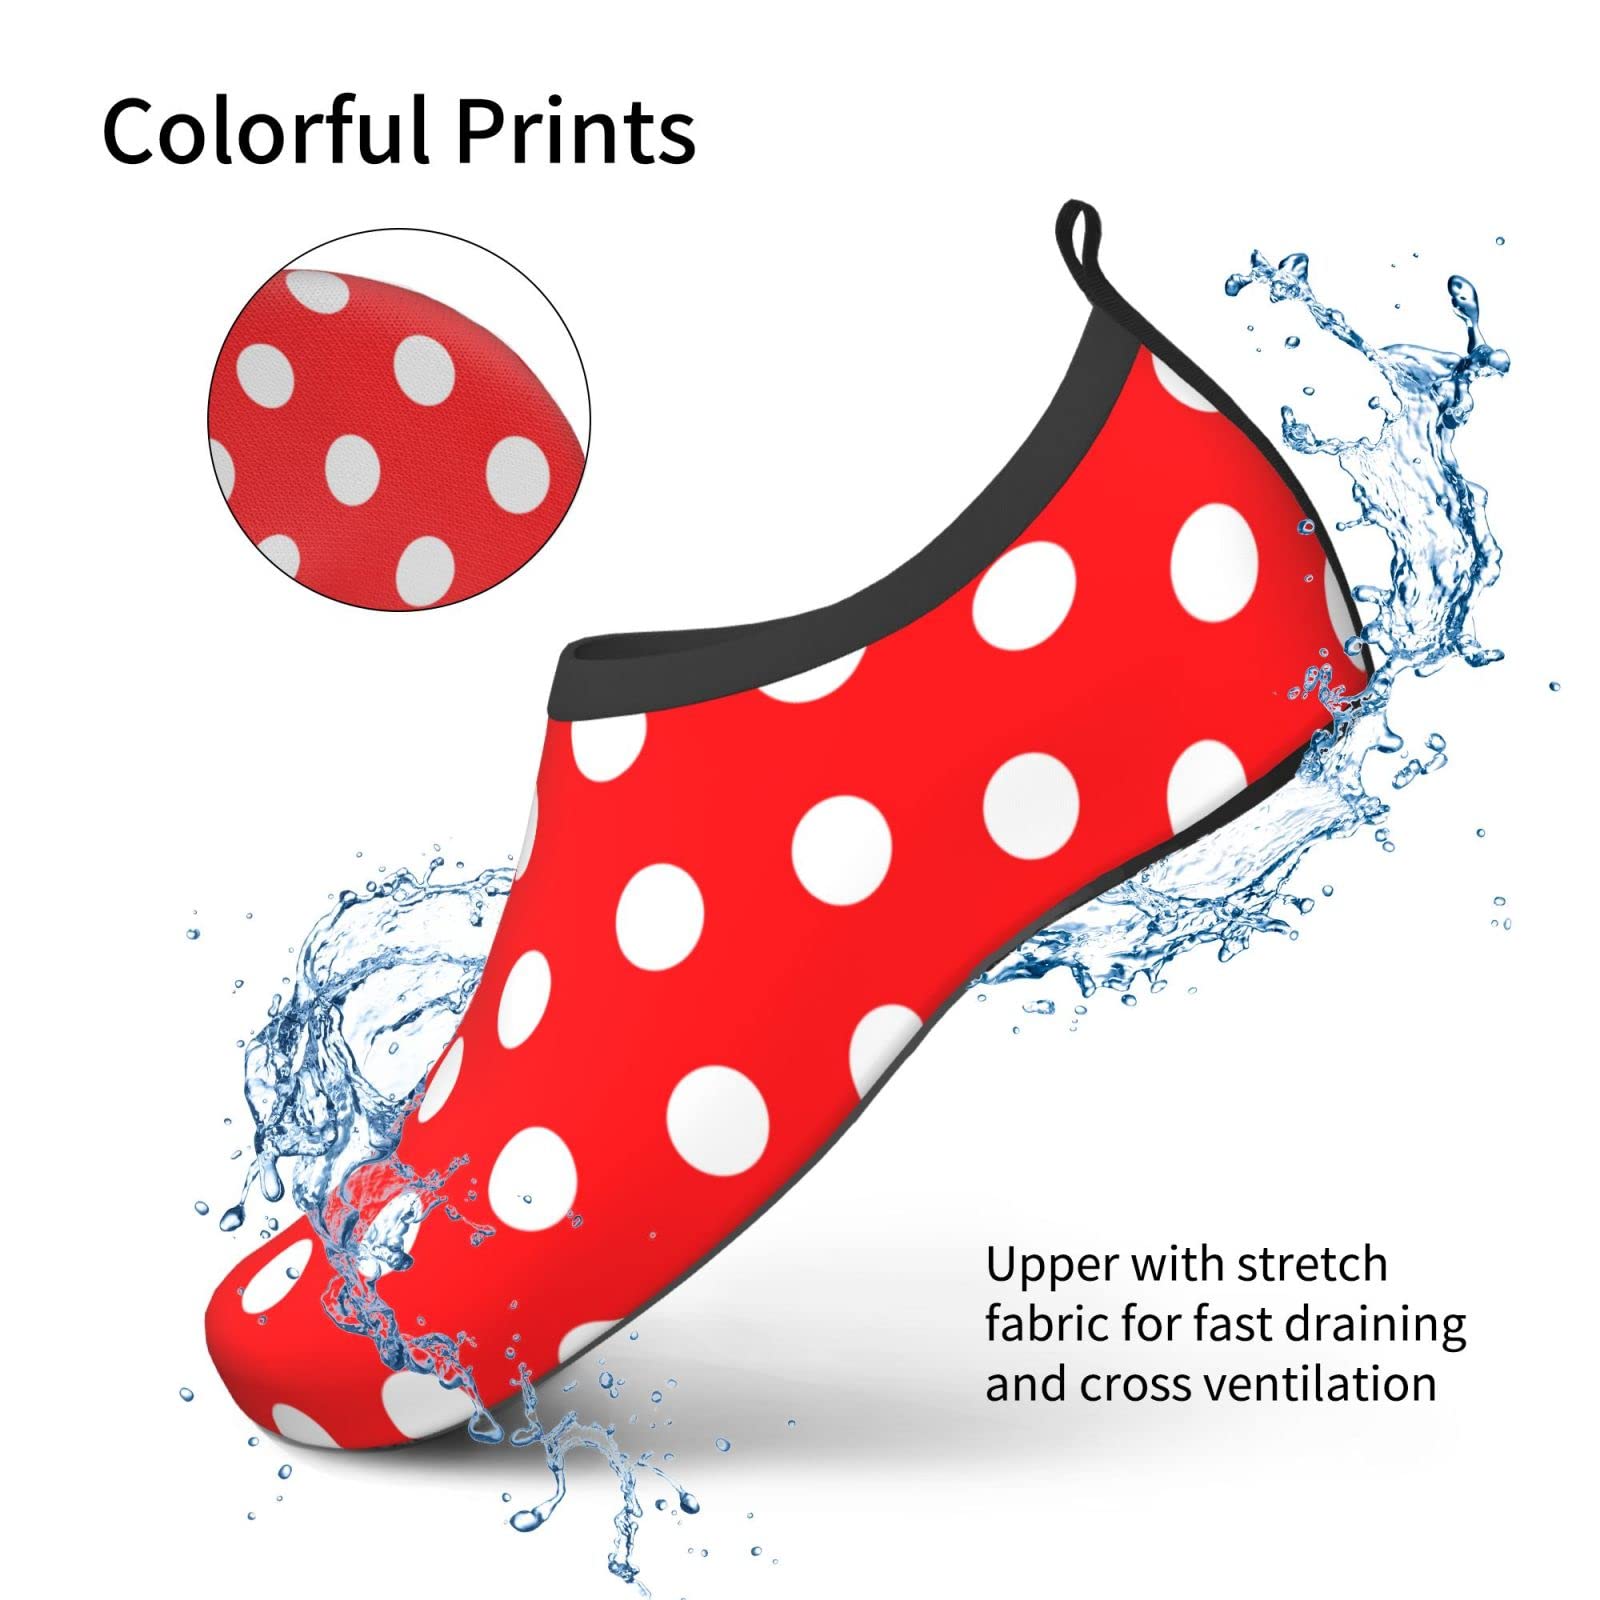 Heantstoy Red White Polka Dot Water Shoes Breathable Quick-Dry Yoga Socks Sports Shoes for Women Men